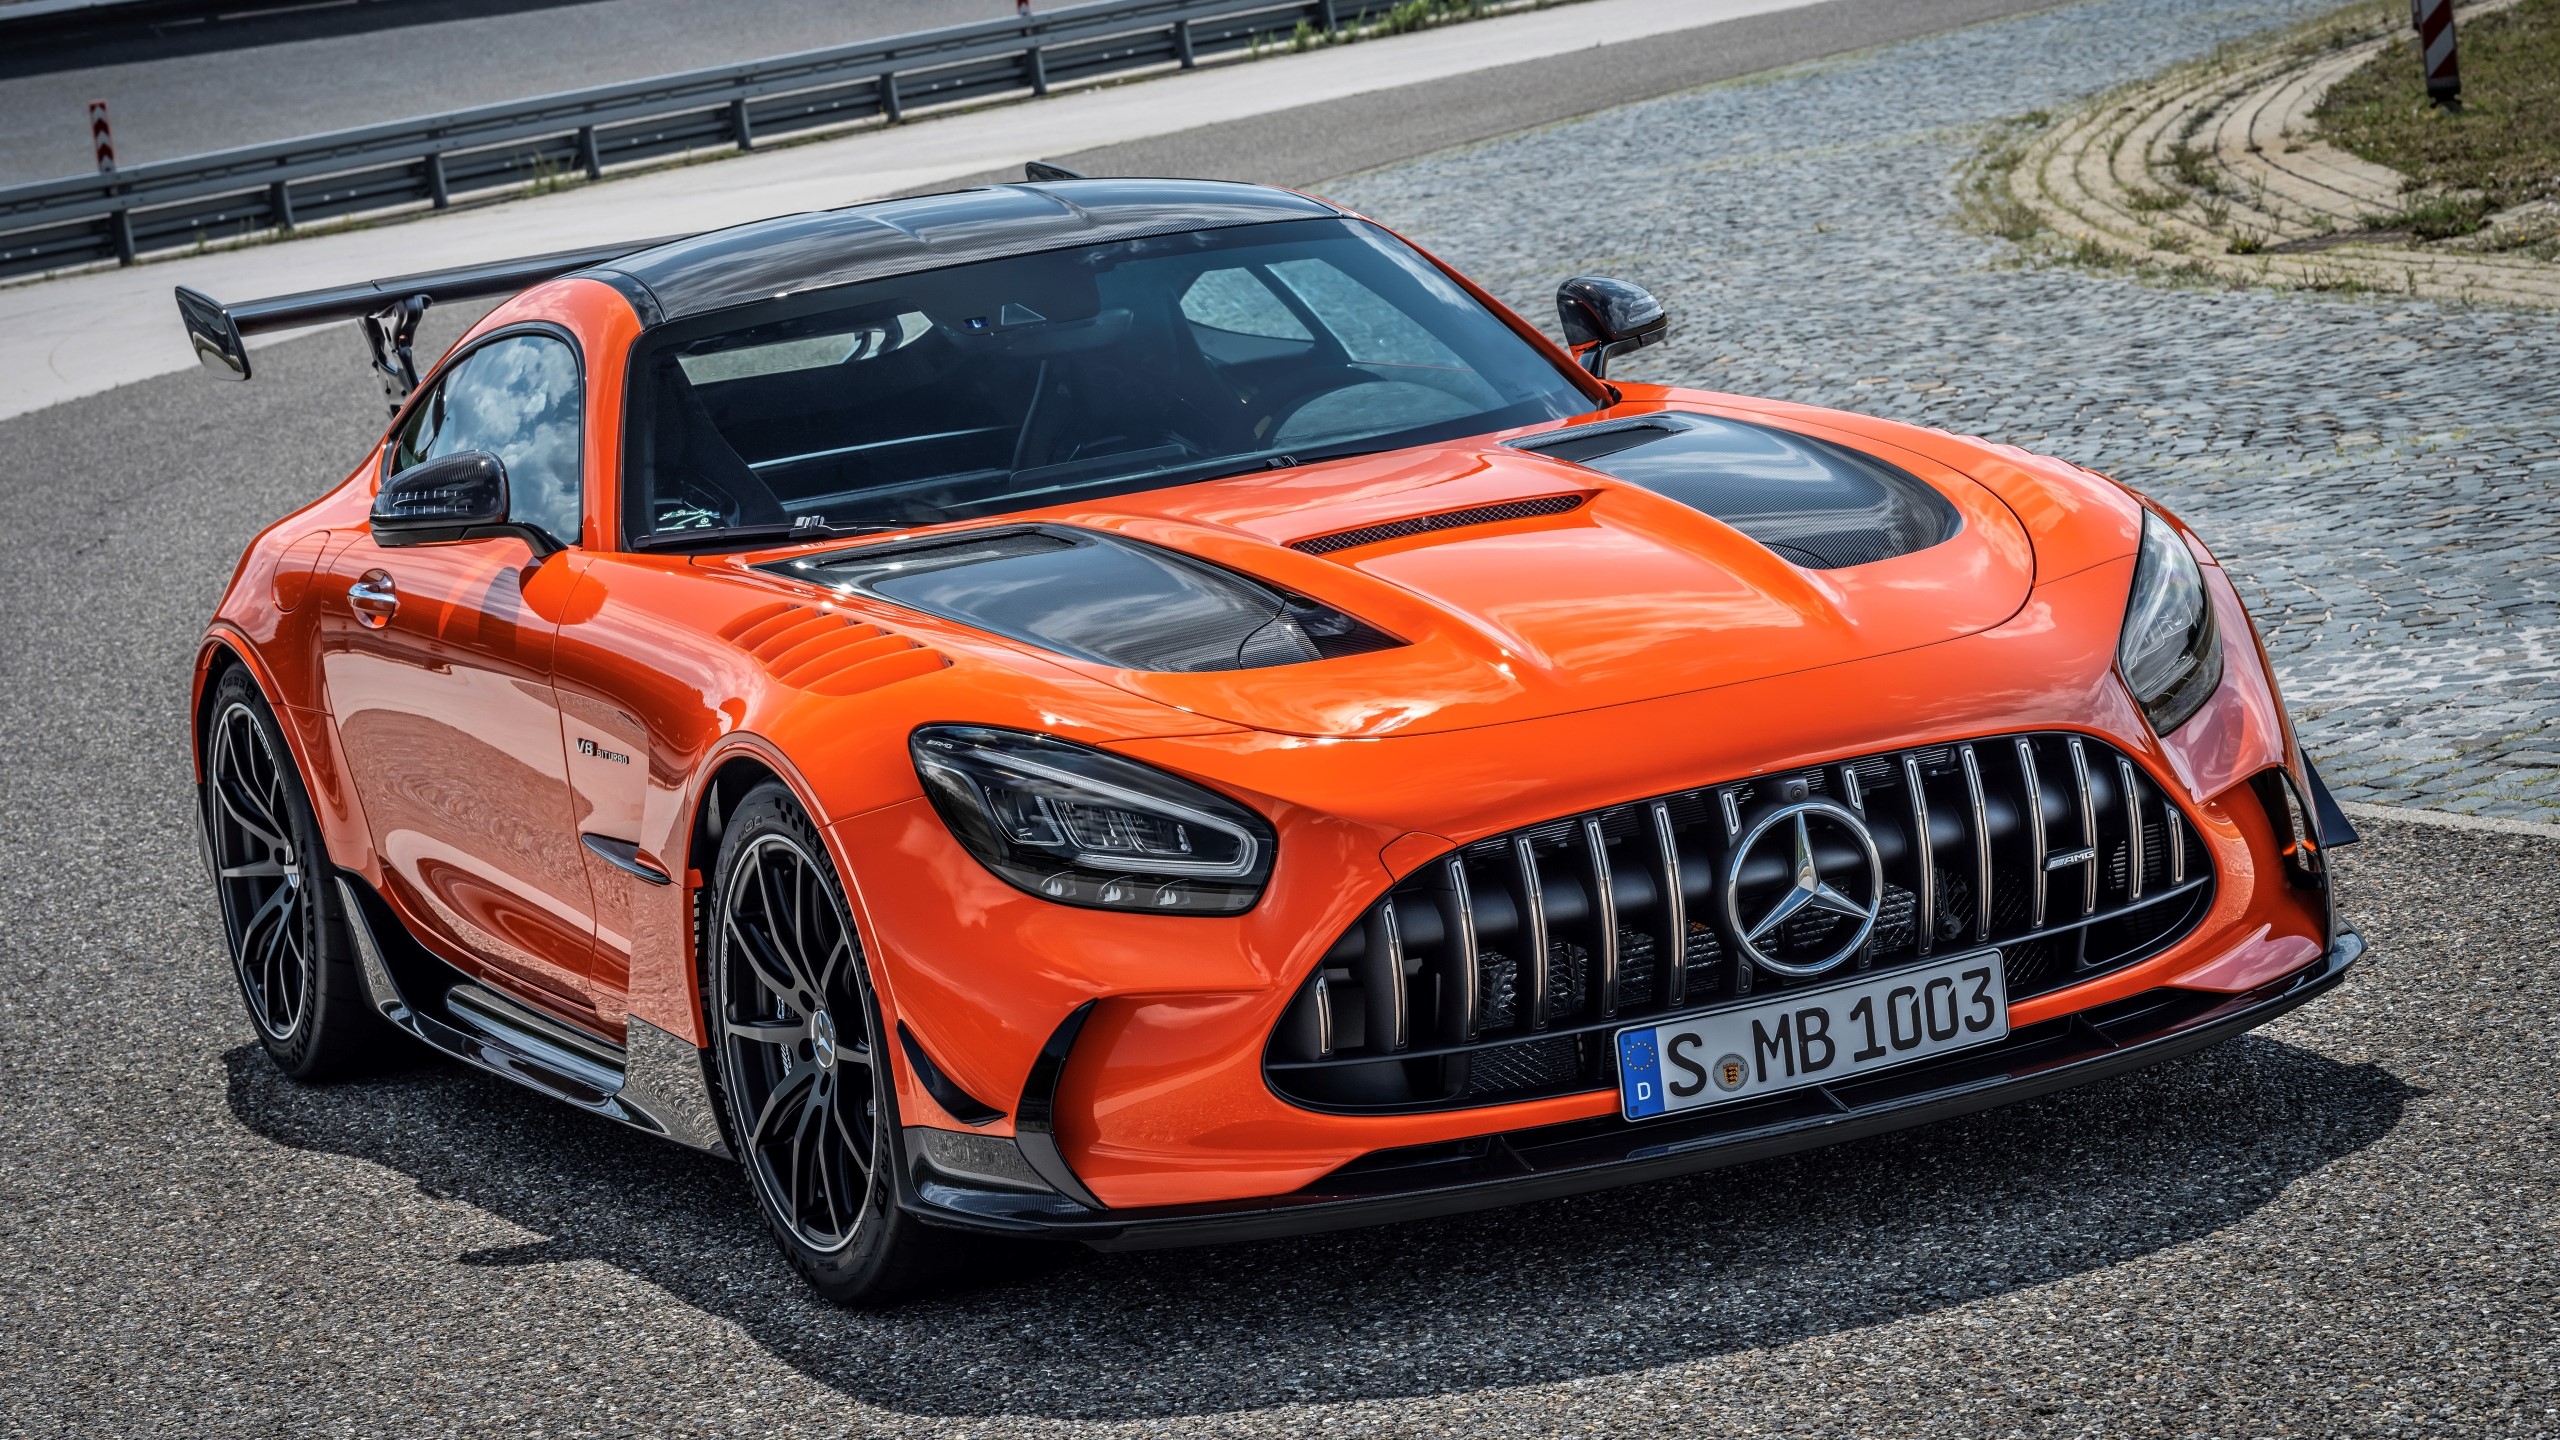 The 21 Mercedes Amg Gt Black Series Will Cost 3000 Or Nearly The Same As Two Gt R Pros The Drive Sydney Online News